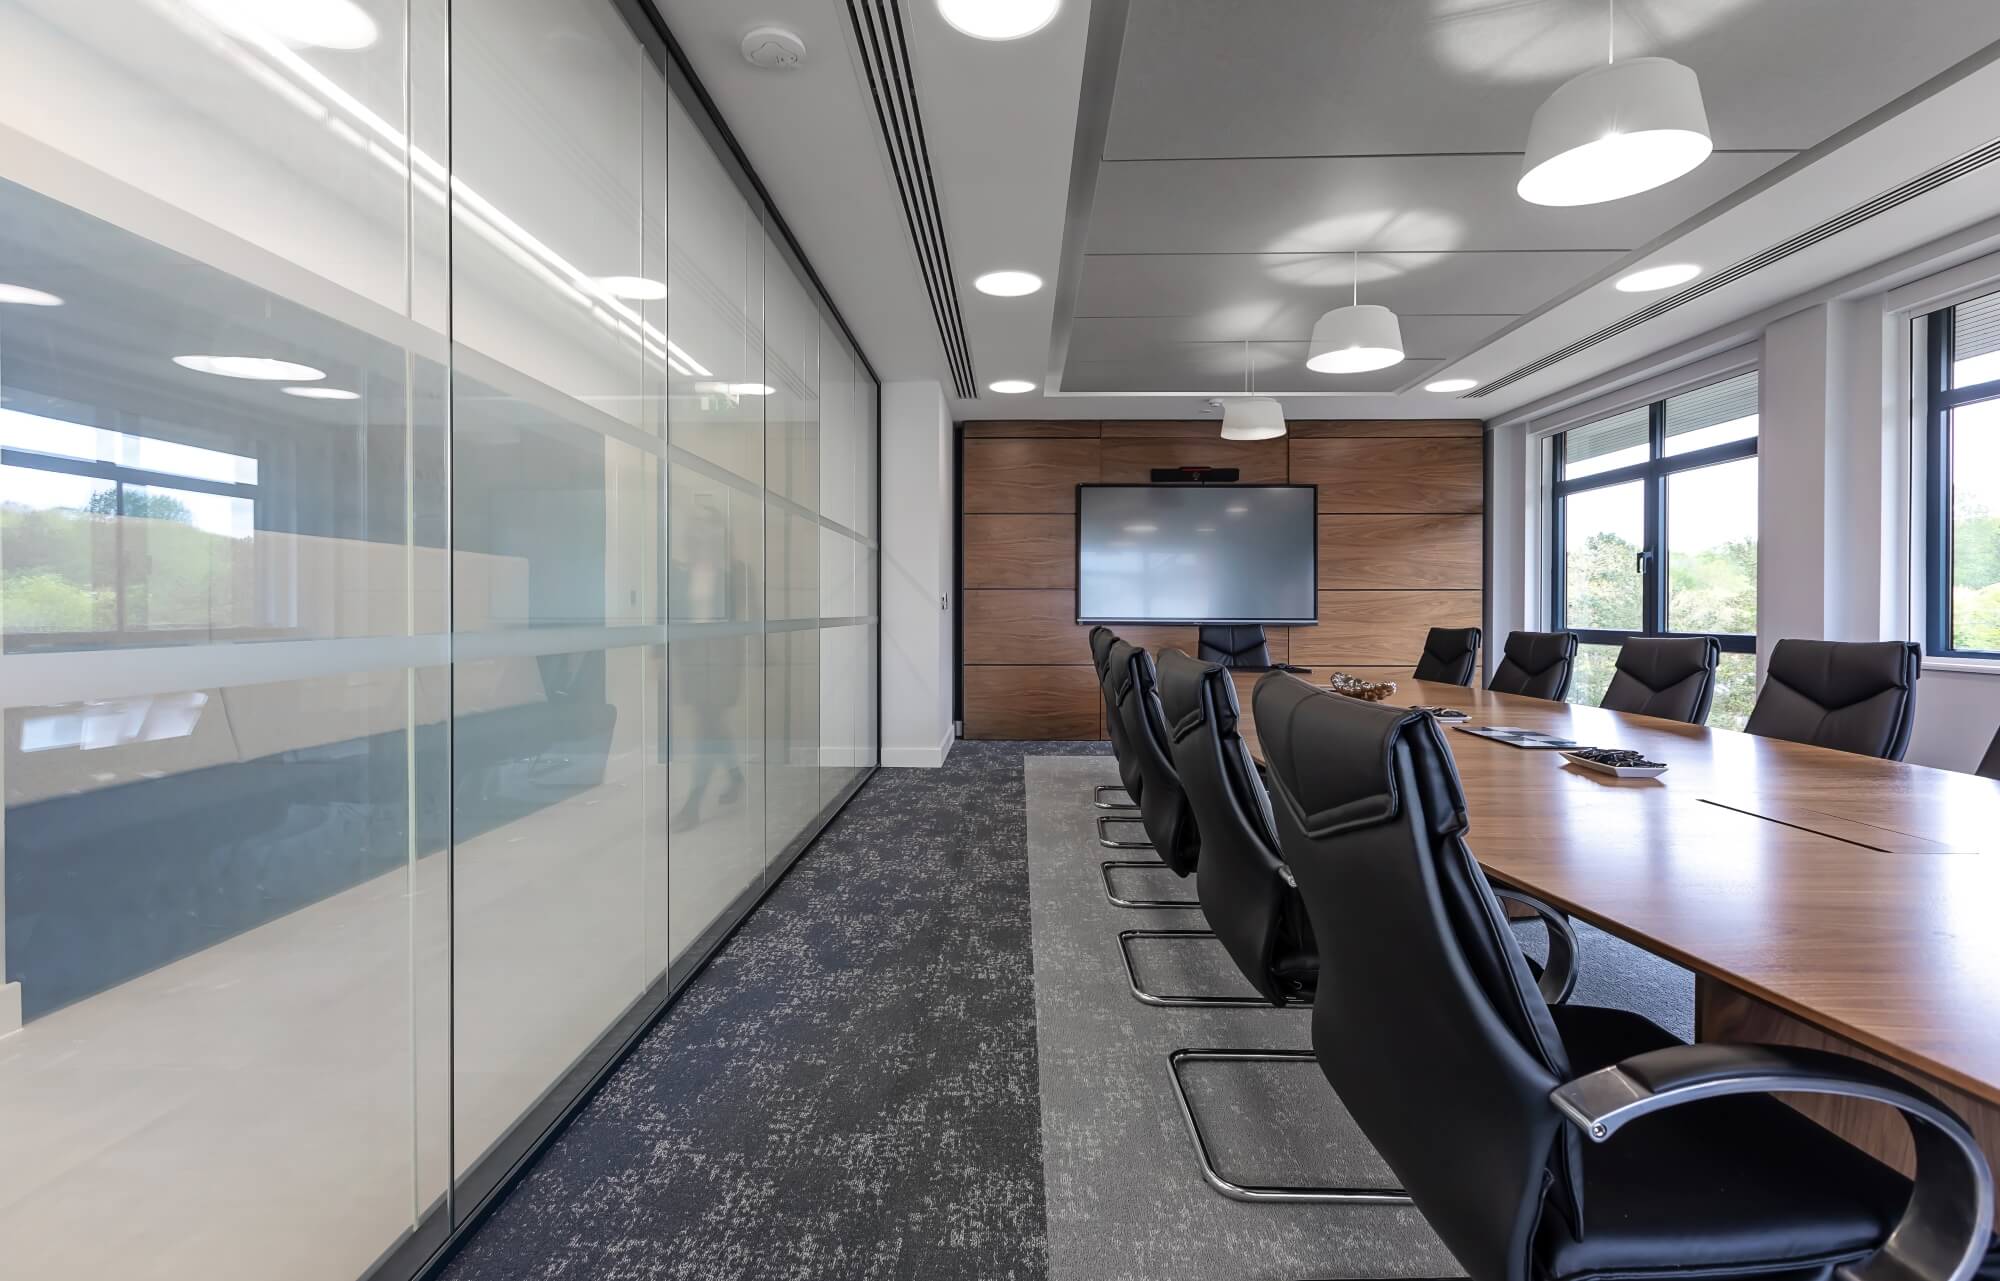 What's the latest design trend in the boardroom and waiting areas